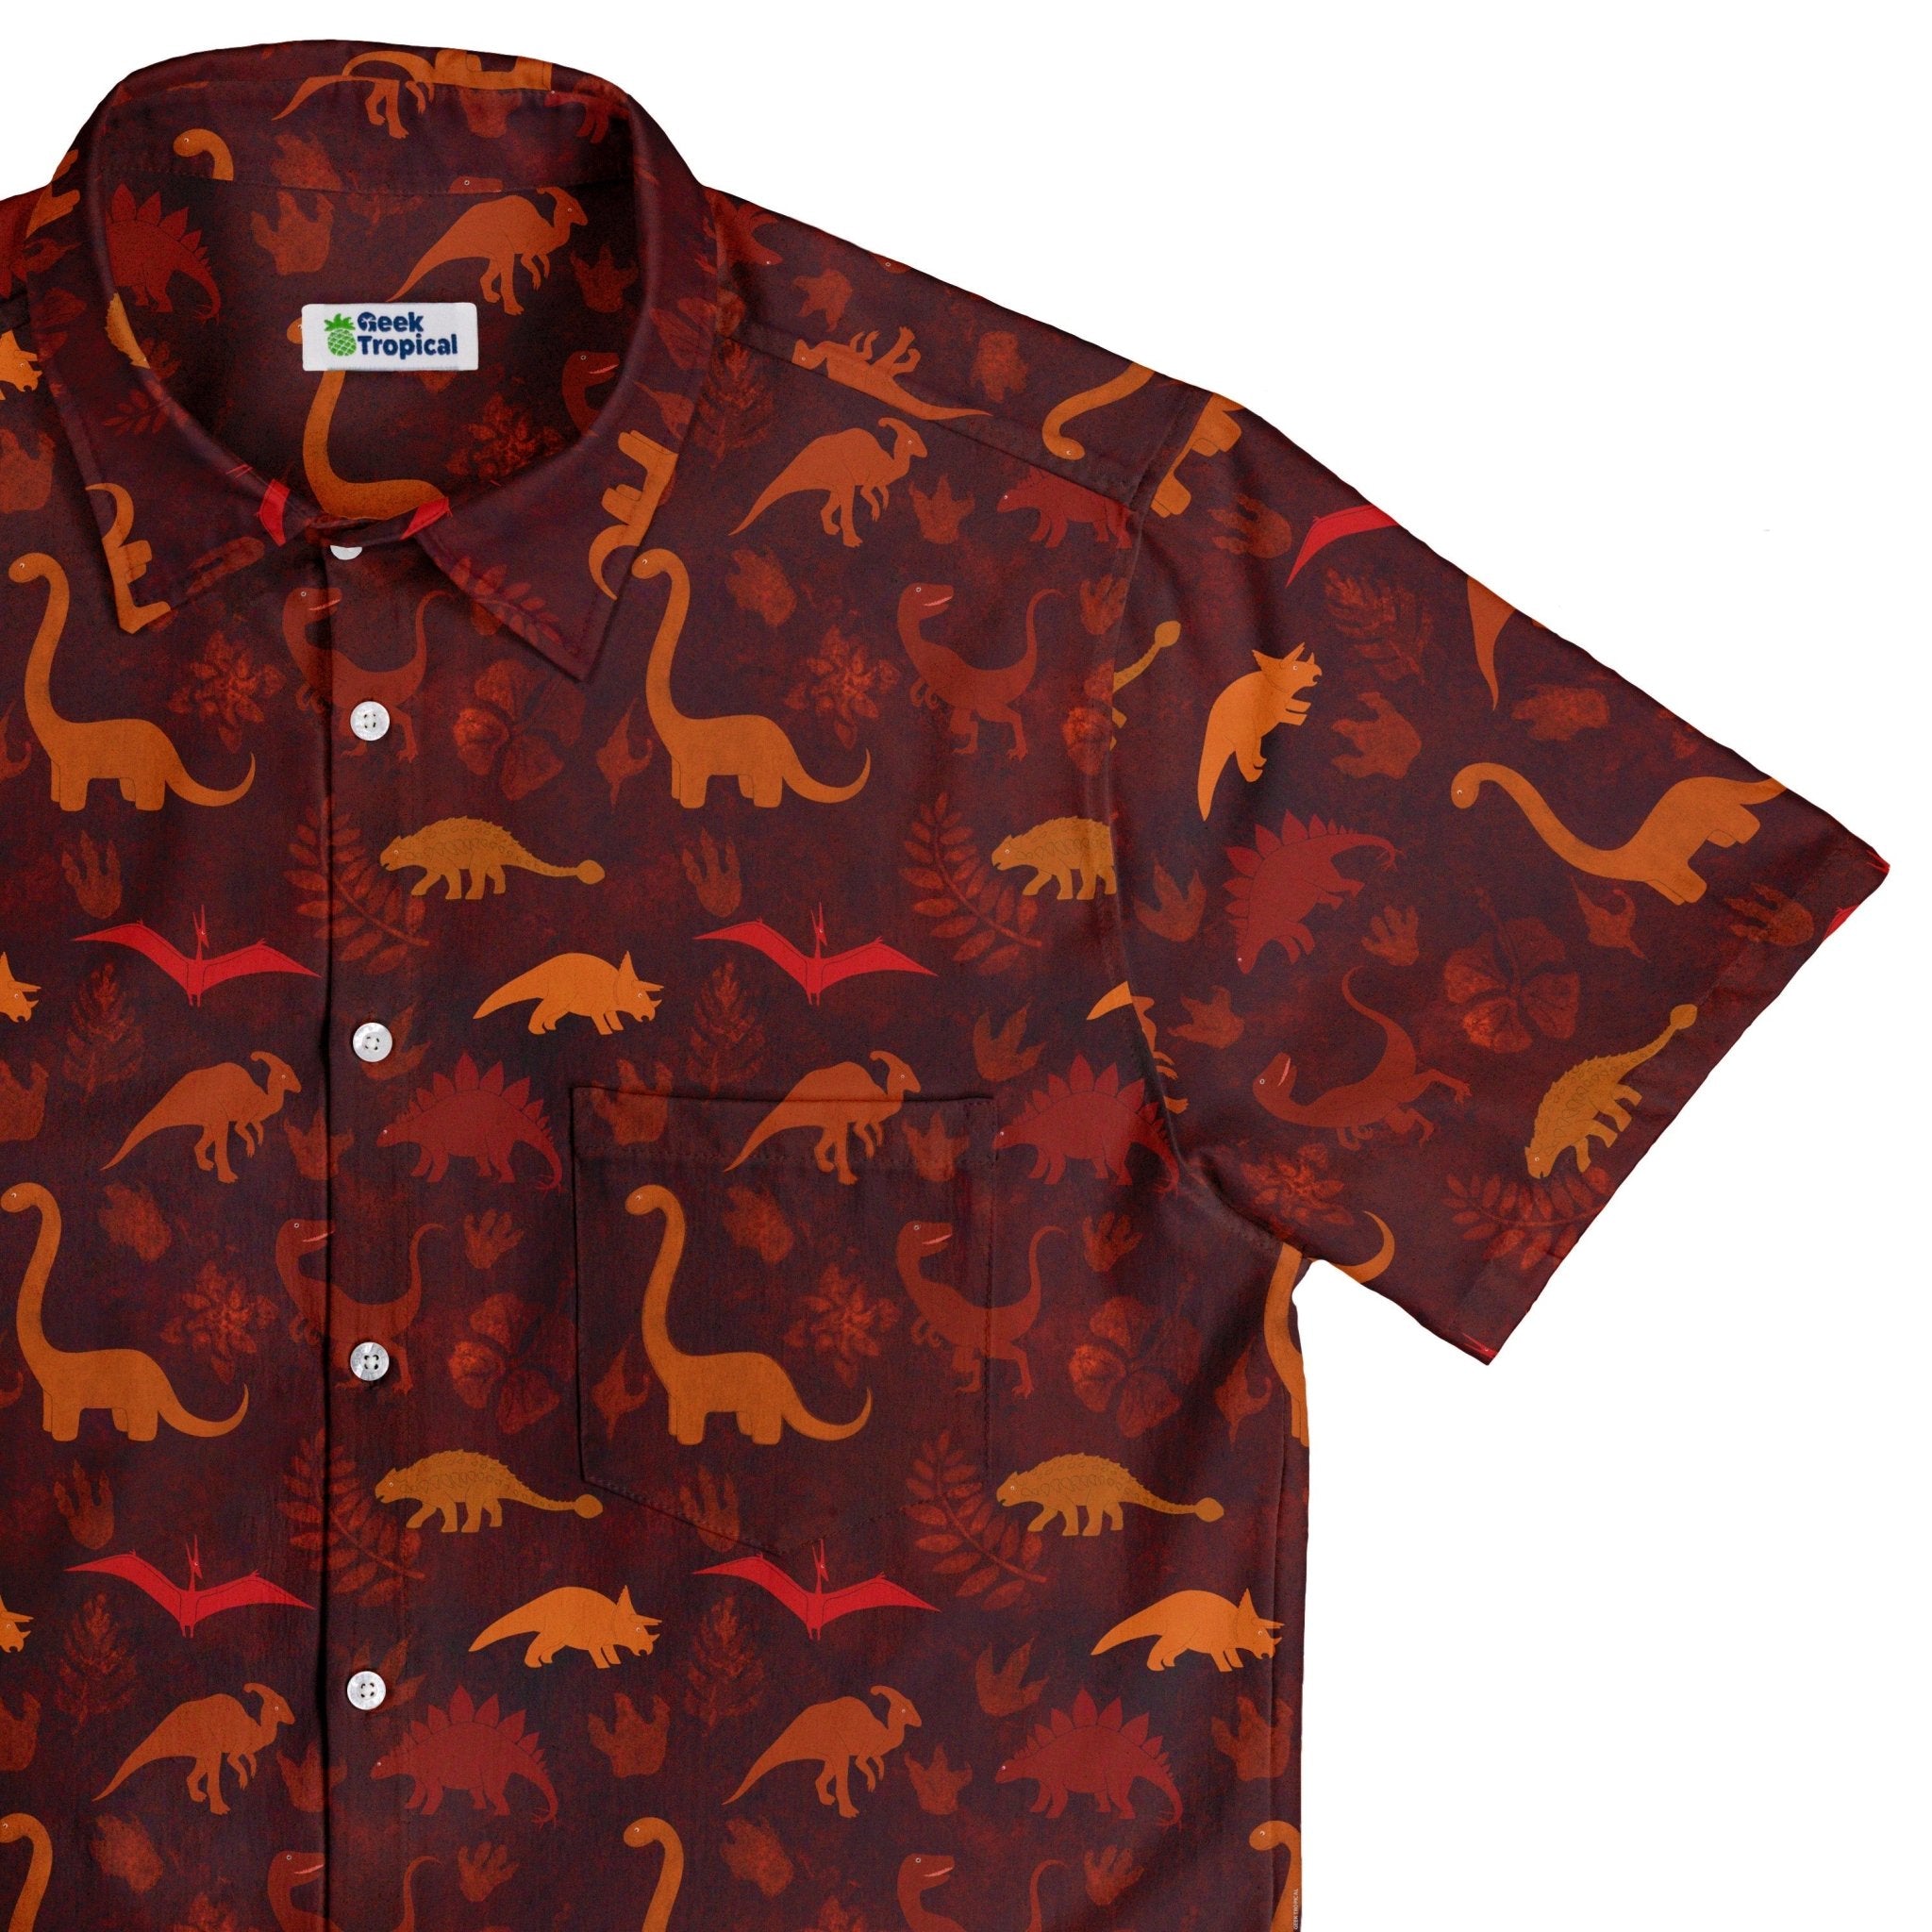 Dinosaur Tropical Sunset Button Up Shirt - adult sizing - Animal Patterns - Designs by Nathan